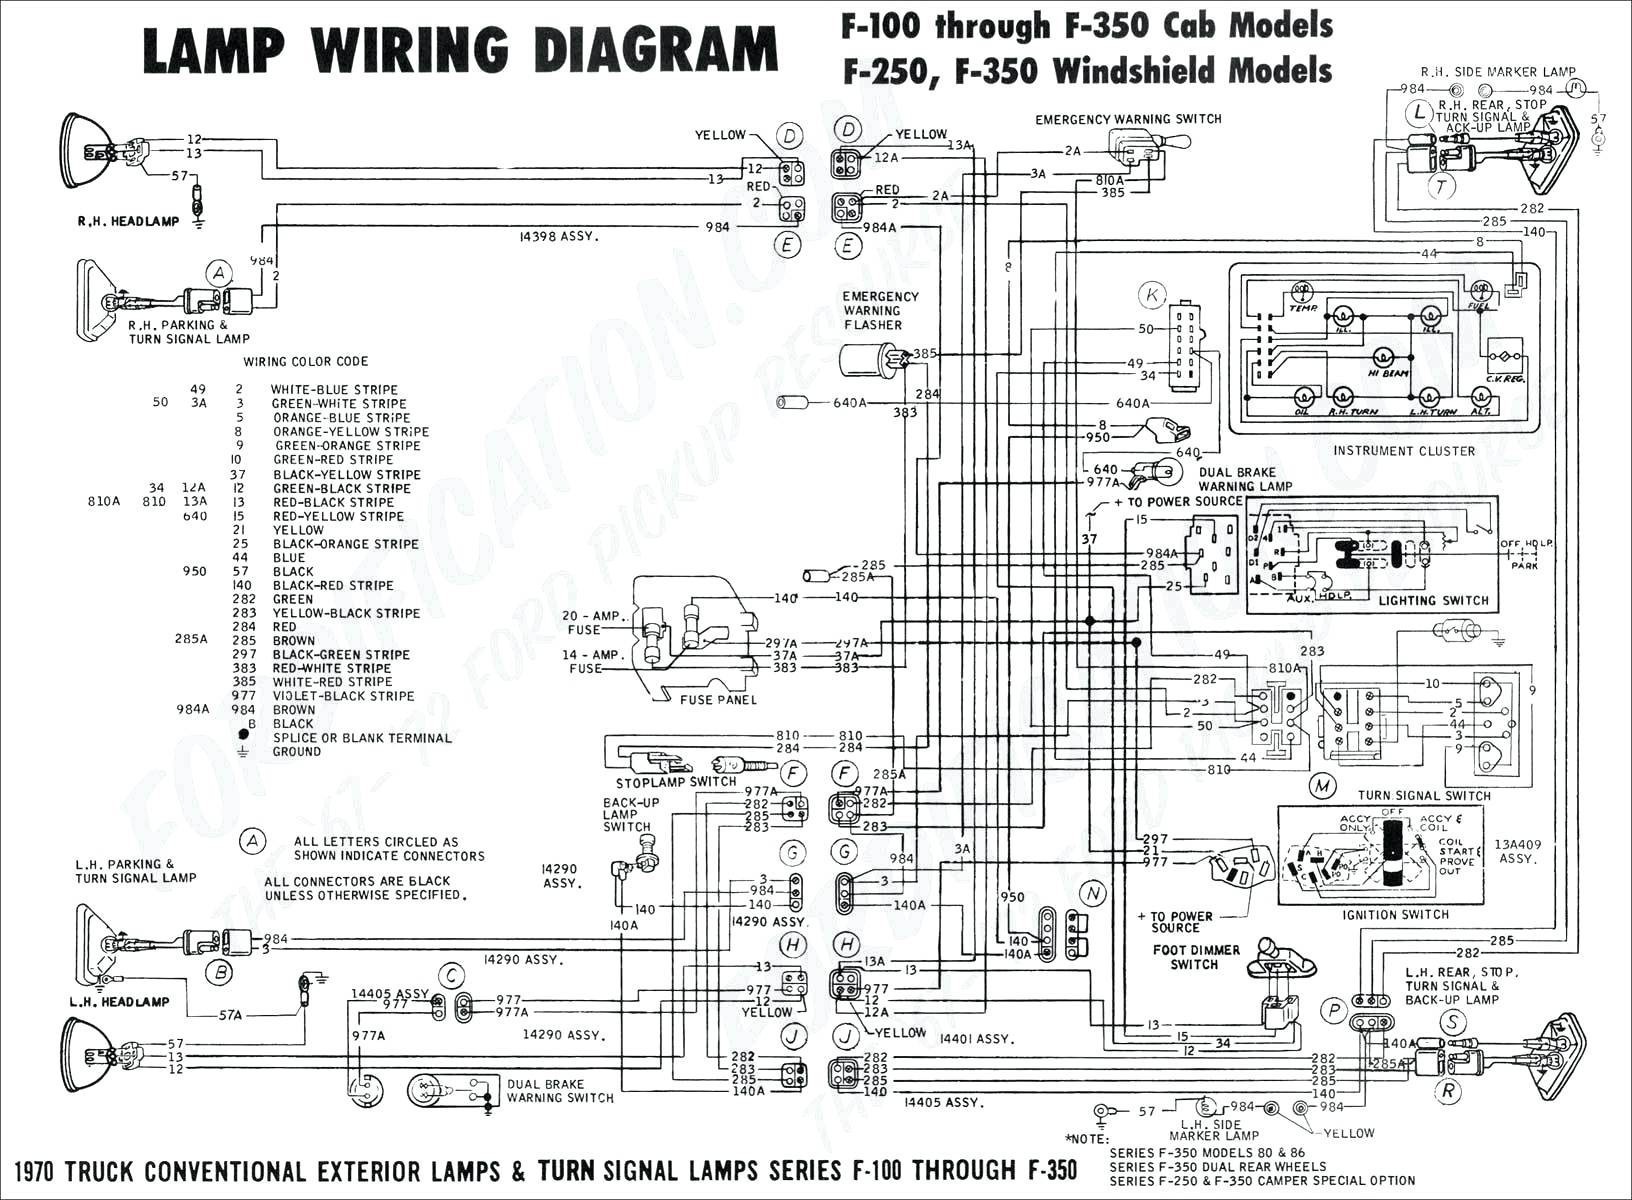 2001 Chevy S10 Engine Diagram Wiring Diagram 2000 Chevy S10 Rear End Wiring Diagram Load Of 2001 Chevy S10 Engine Diagram